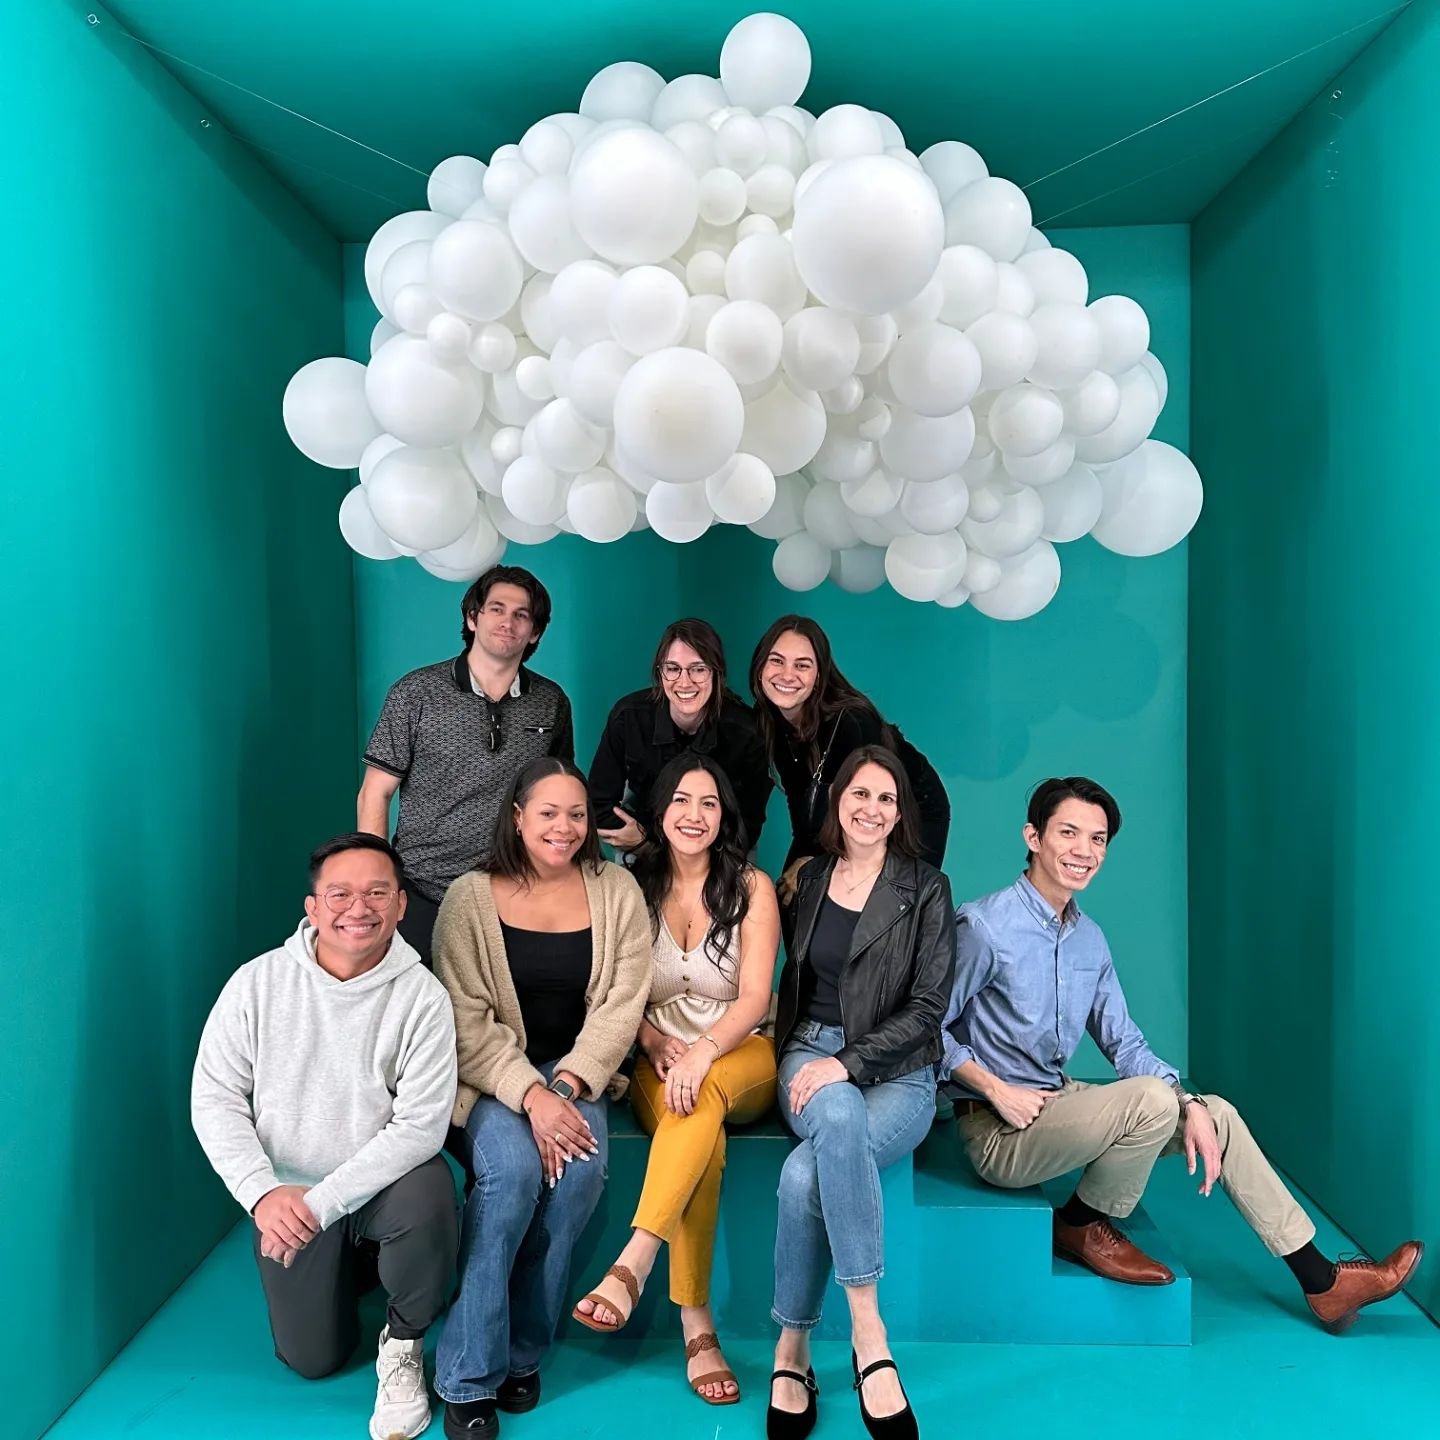 Taking our design creativity to new heights at the @balloon_museum with @ieoffices and @sescolighting_atlanta! Because when it comes to design, even the sky's not the limit! 🎈🌠